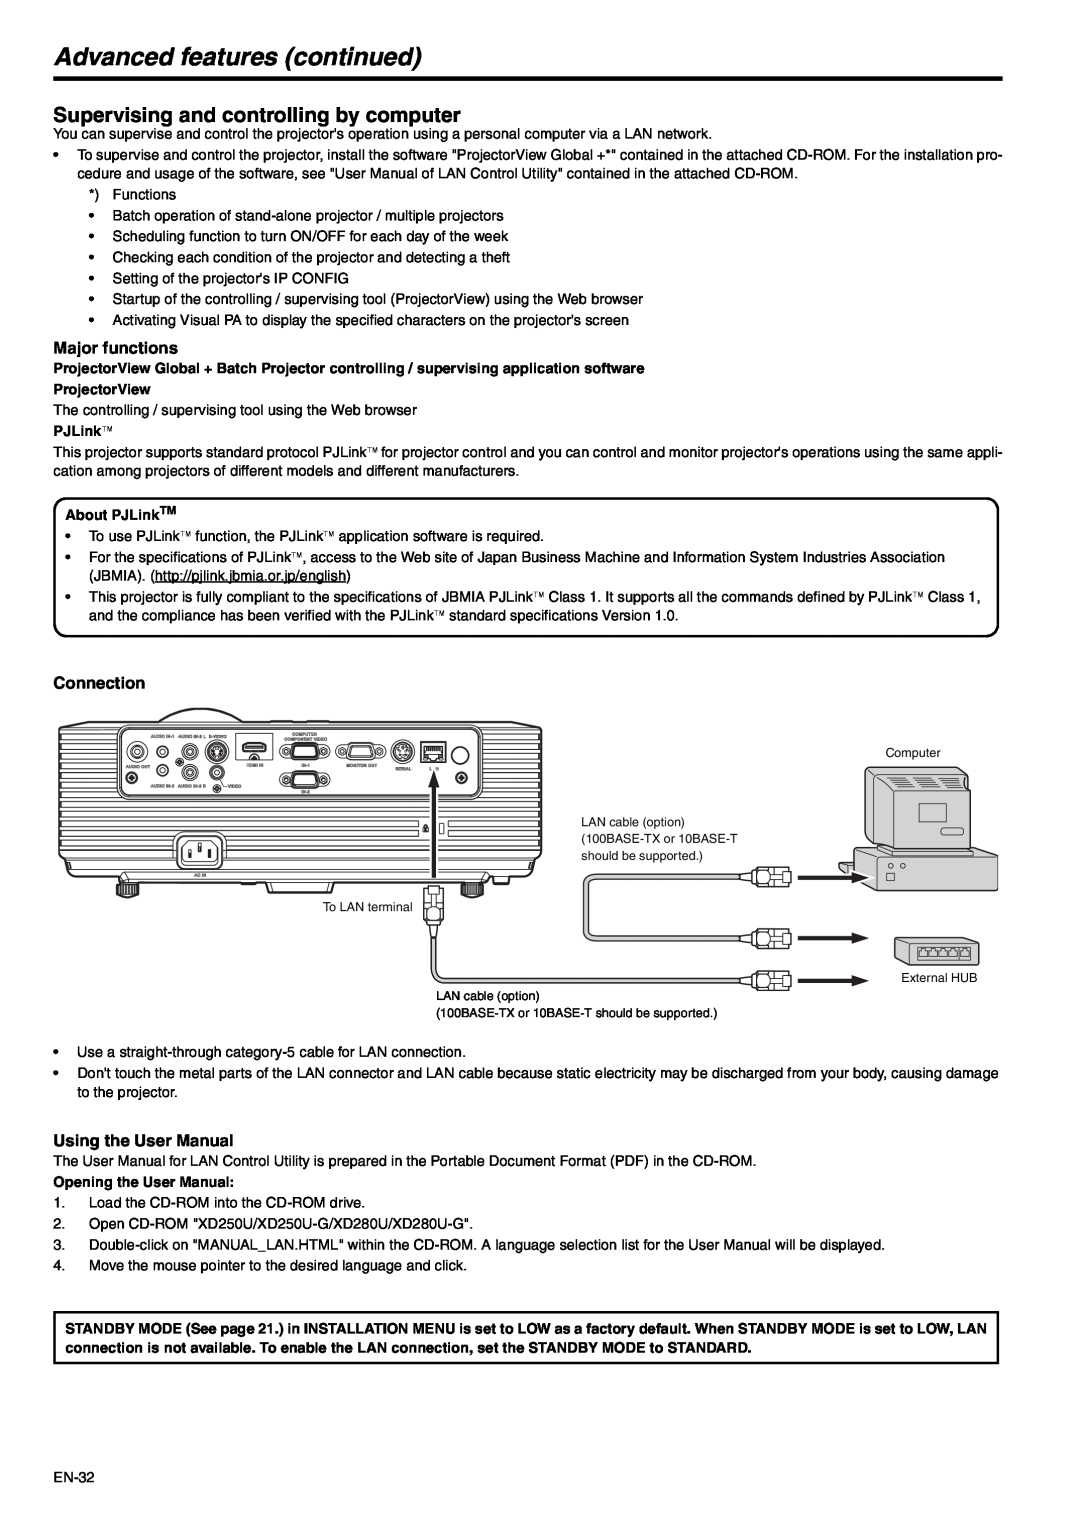 Mitsubishi Electronics XD280U-G, XD250U-G user manual Supervising and controlling by computer, Major functions, Connection 